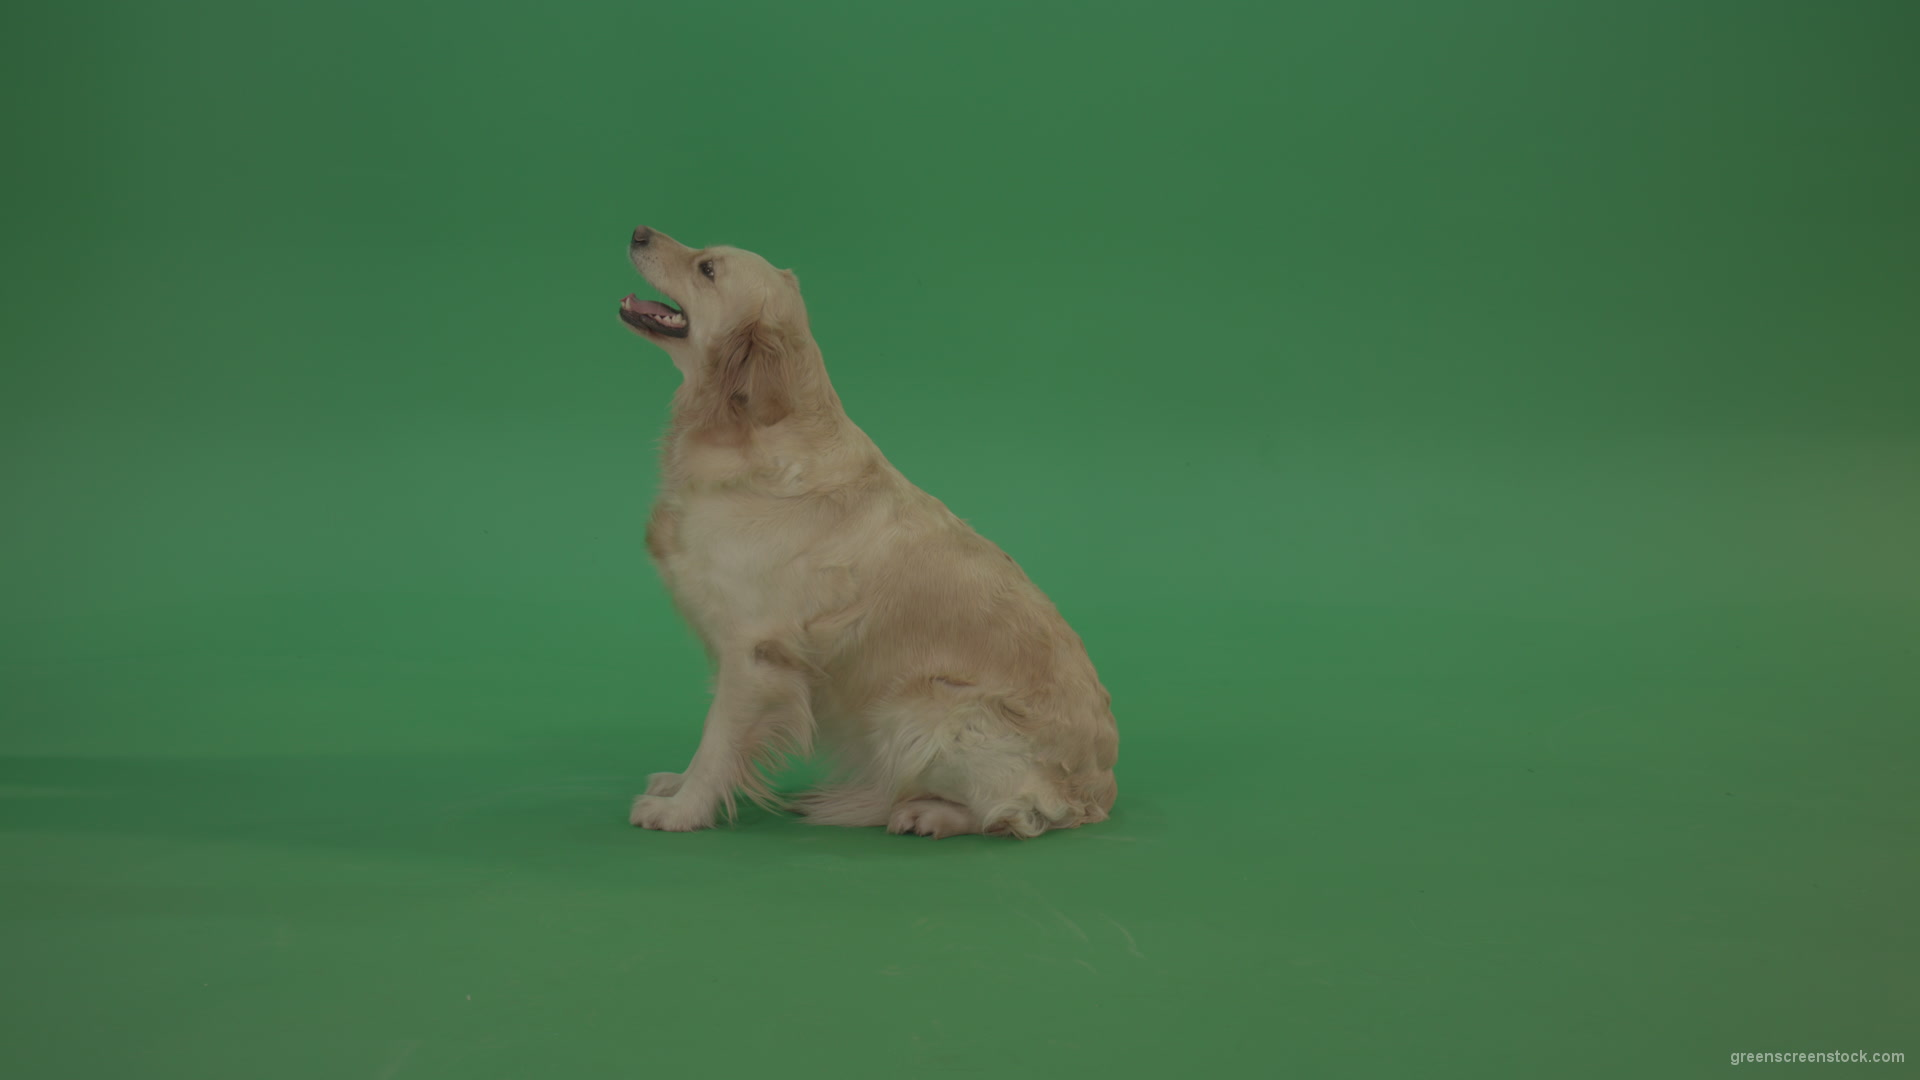 Golden-Retriever-green-screen-dog-in-side-view-barking-isolated-on-chromakey-green-background_005 Green Screen Stock